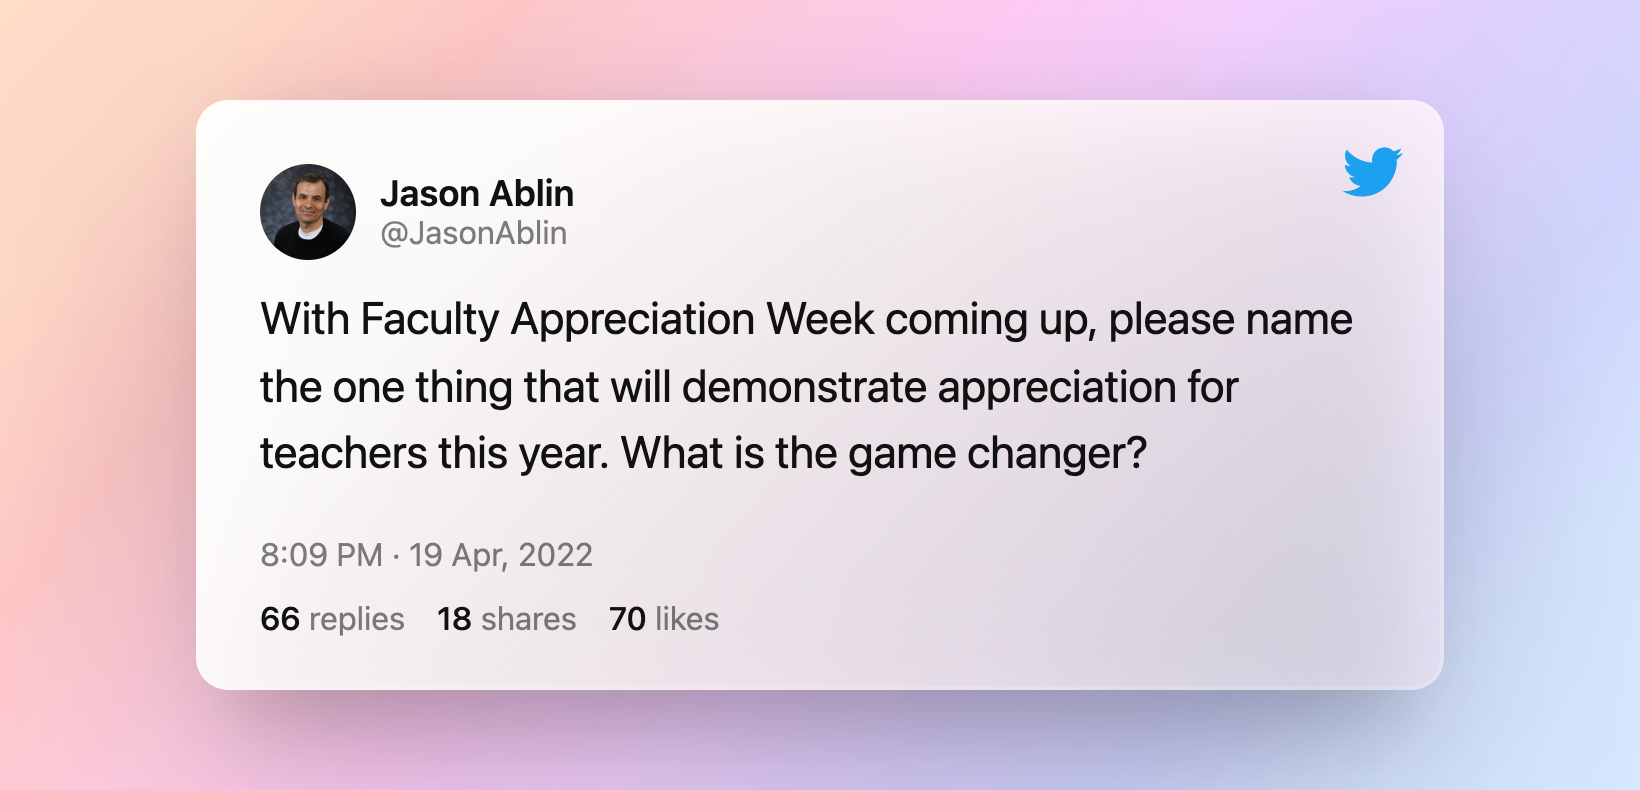 Tweet asking teachers one thing they want for Teacher Appreciation Week.